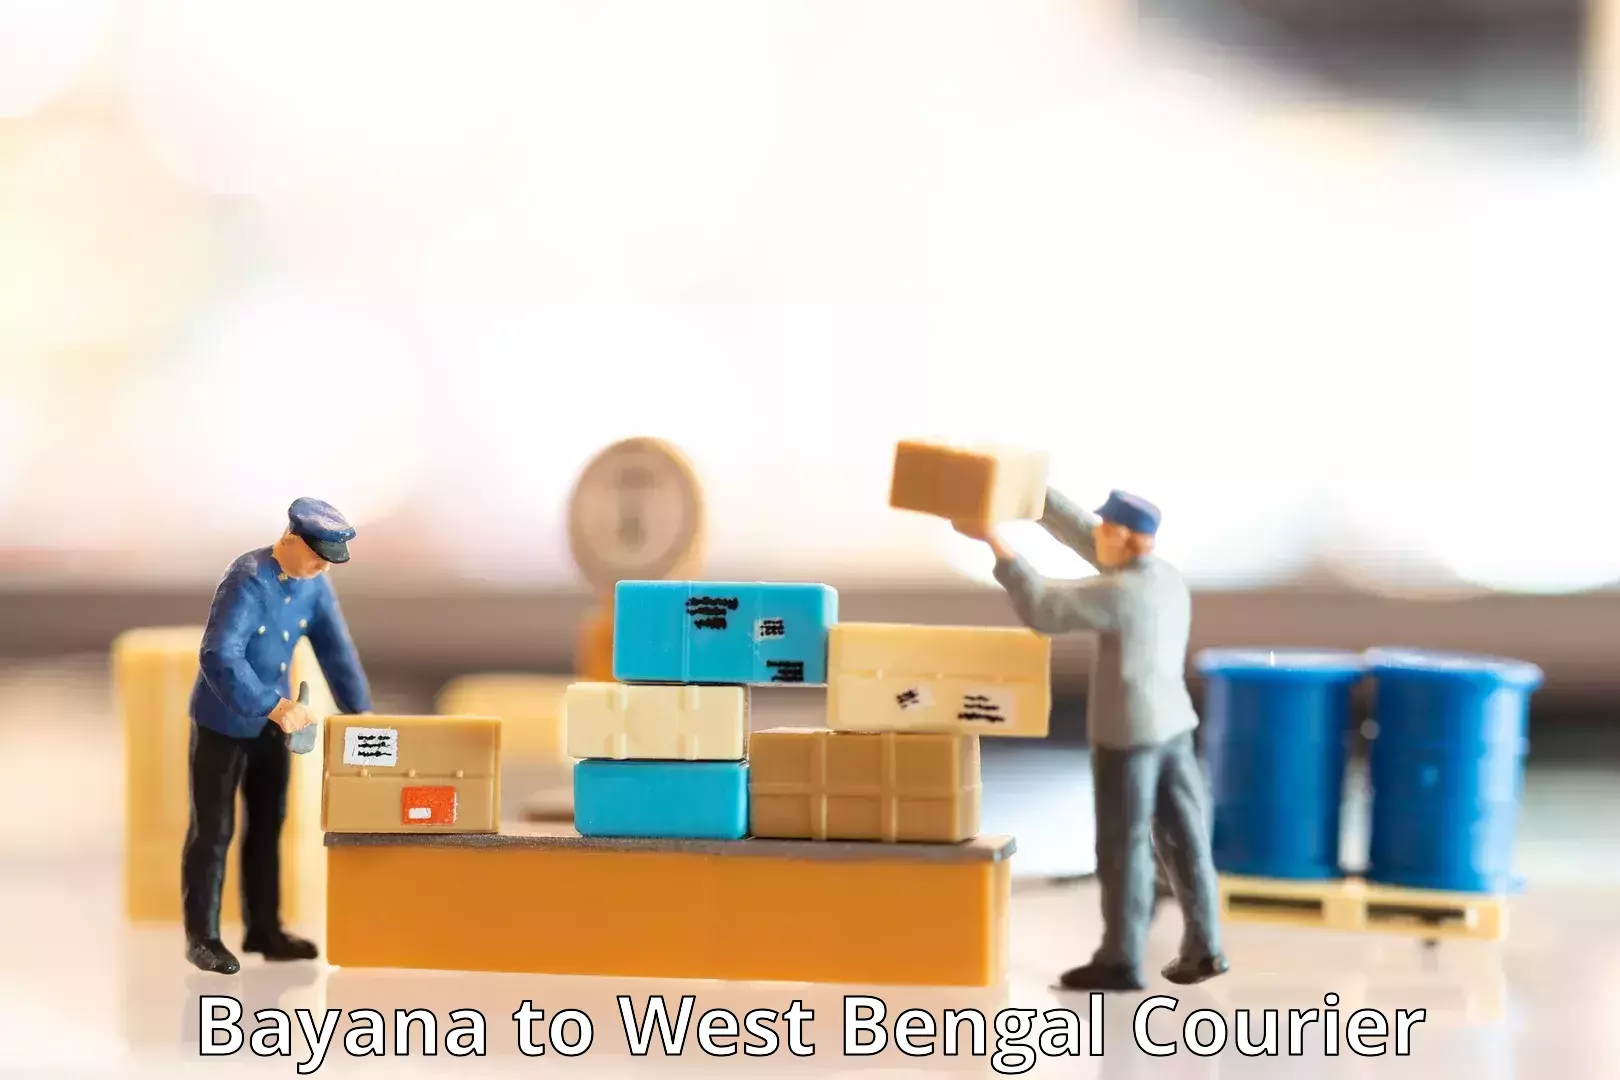 Express delivery network Bayana to West Bengal